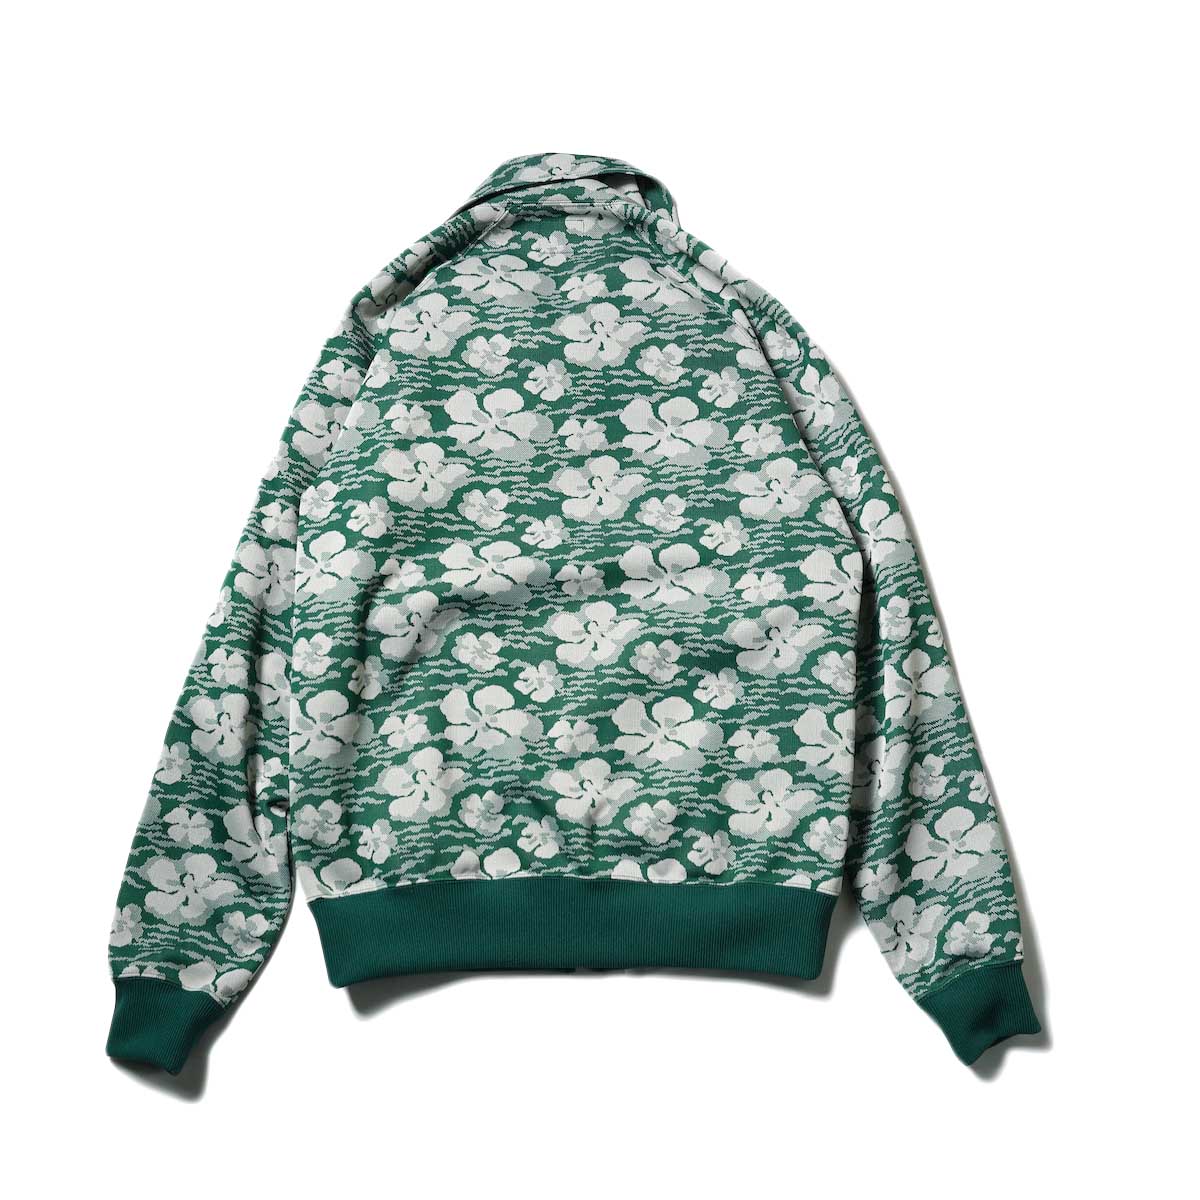 Needles / TRACK JACKET - POLY JQ (Floral)背面